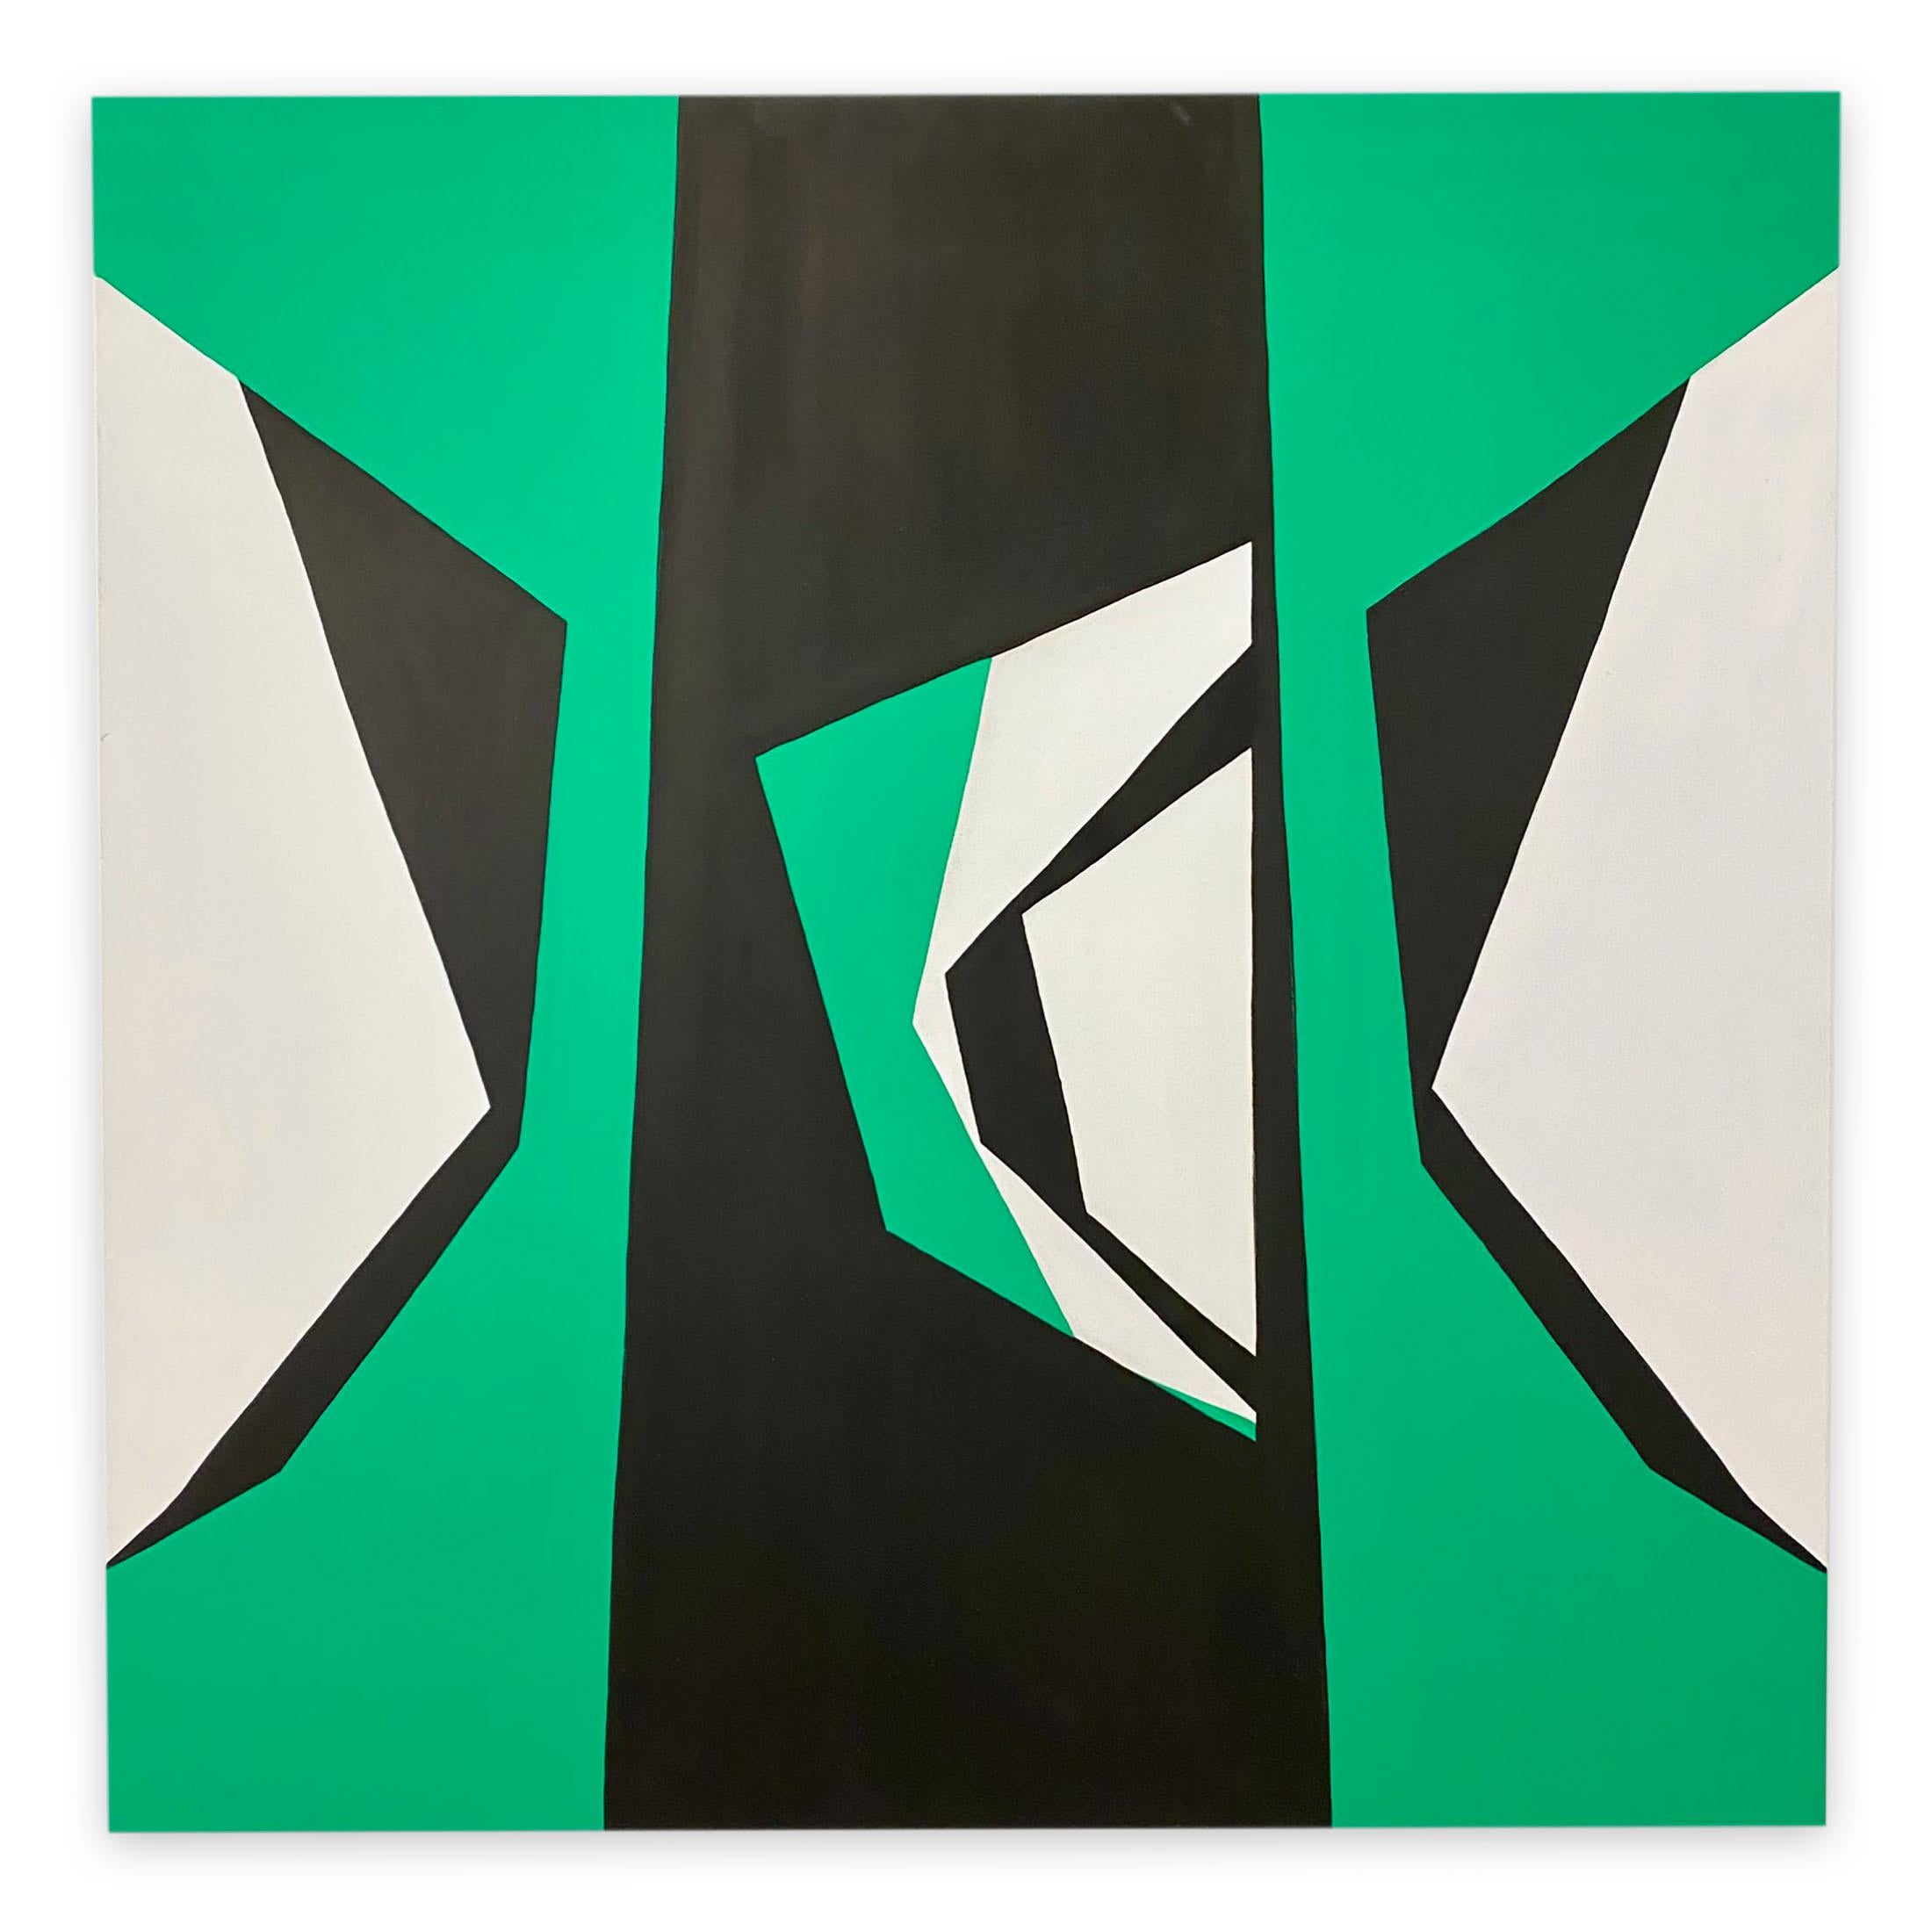 Cut-Up Canvas 2002 (Abstract Painting)

Acrylic on canvas - Unframed.

Pedersen works with acrylic paint.

When painting a composition, she tends toward a limited color palette, often reducing the composition to minimal, hard-edged shapes on